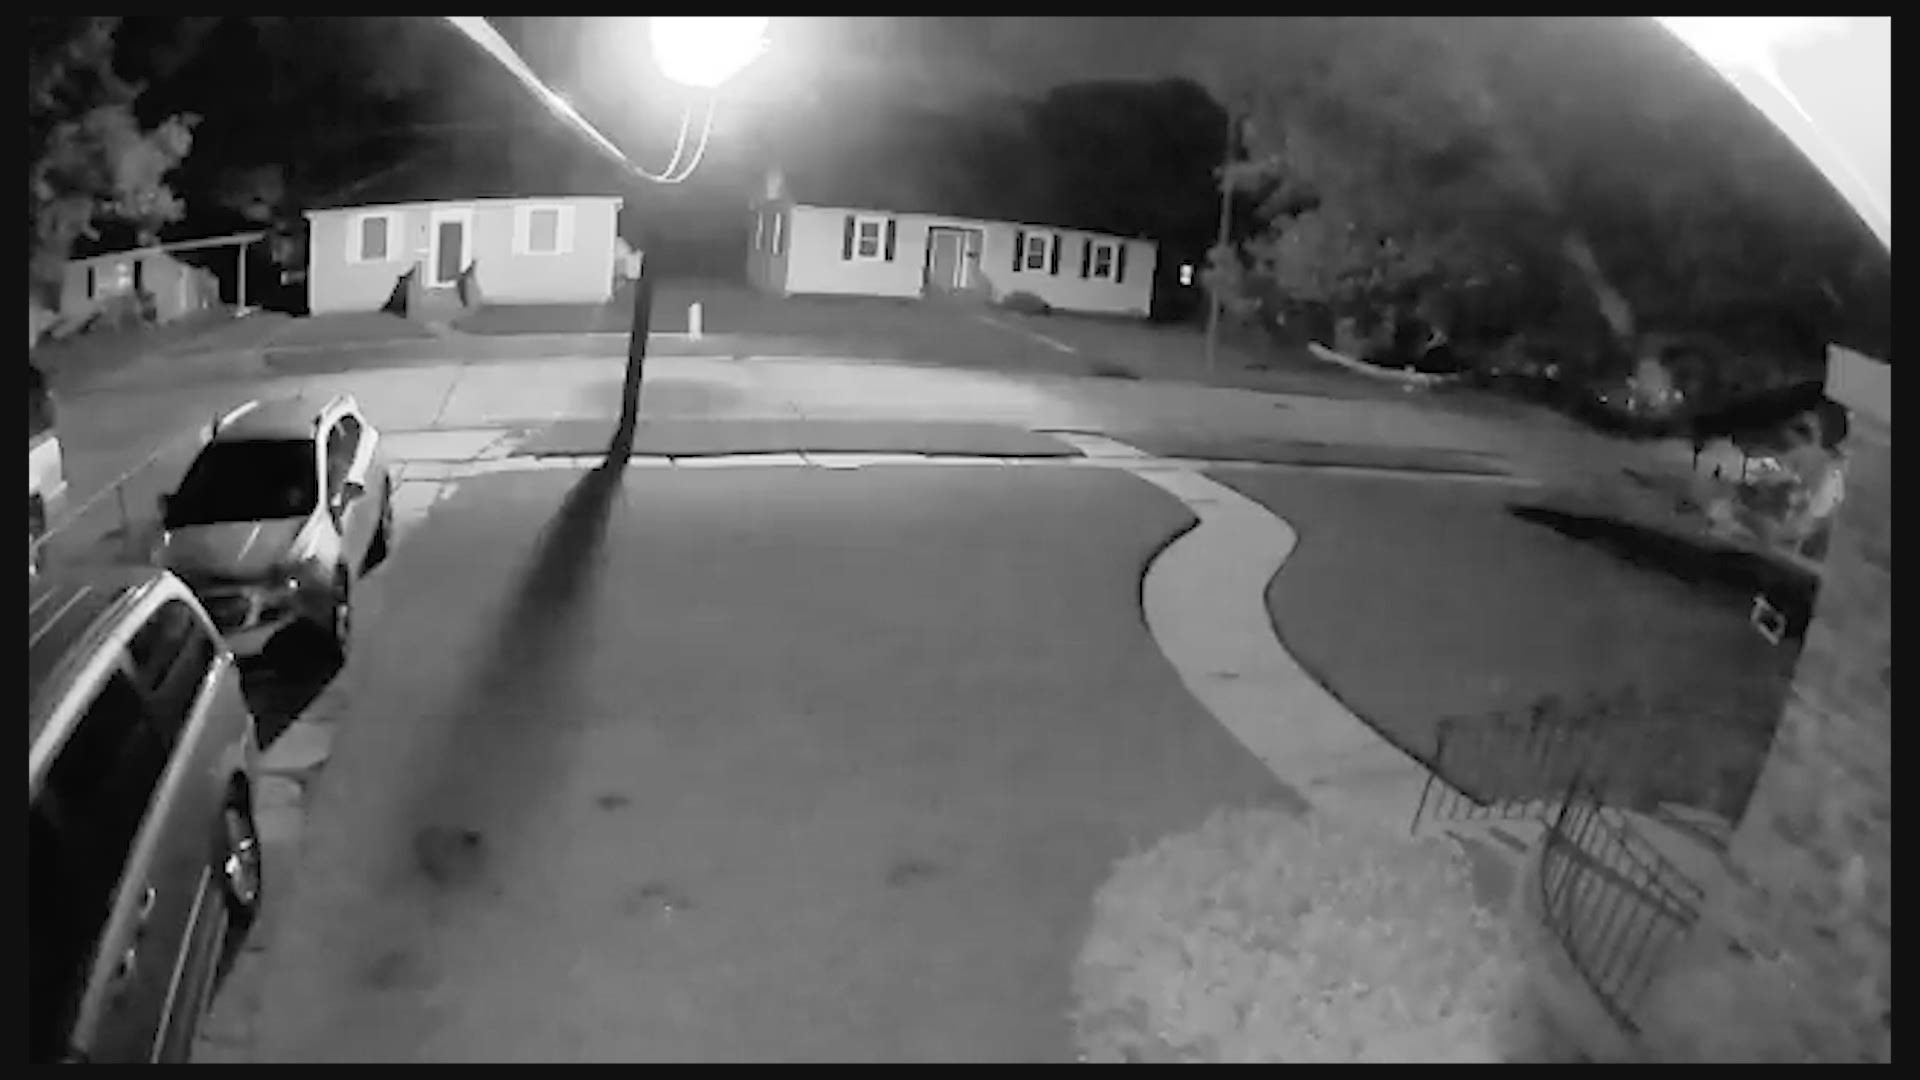 Surveillance cameras capture a coyote catch and kill a cat before carrying it away.